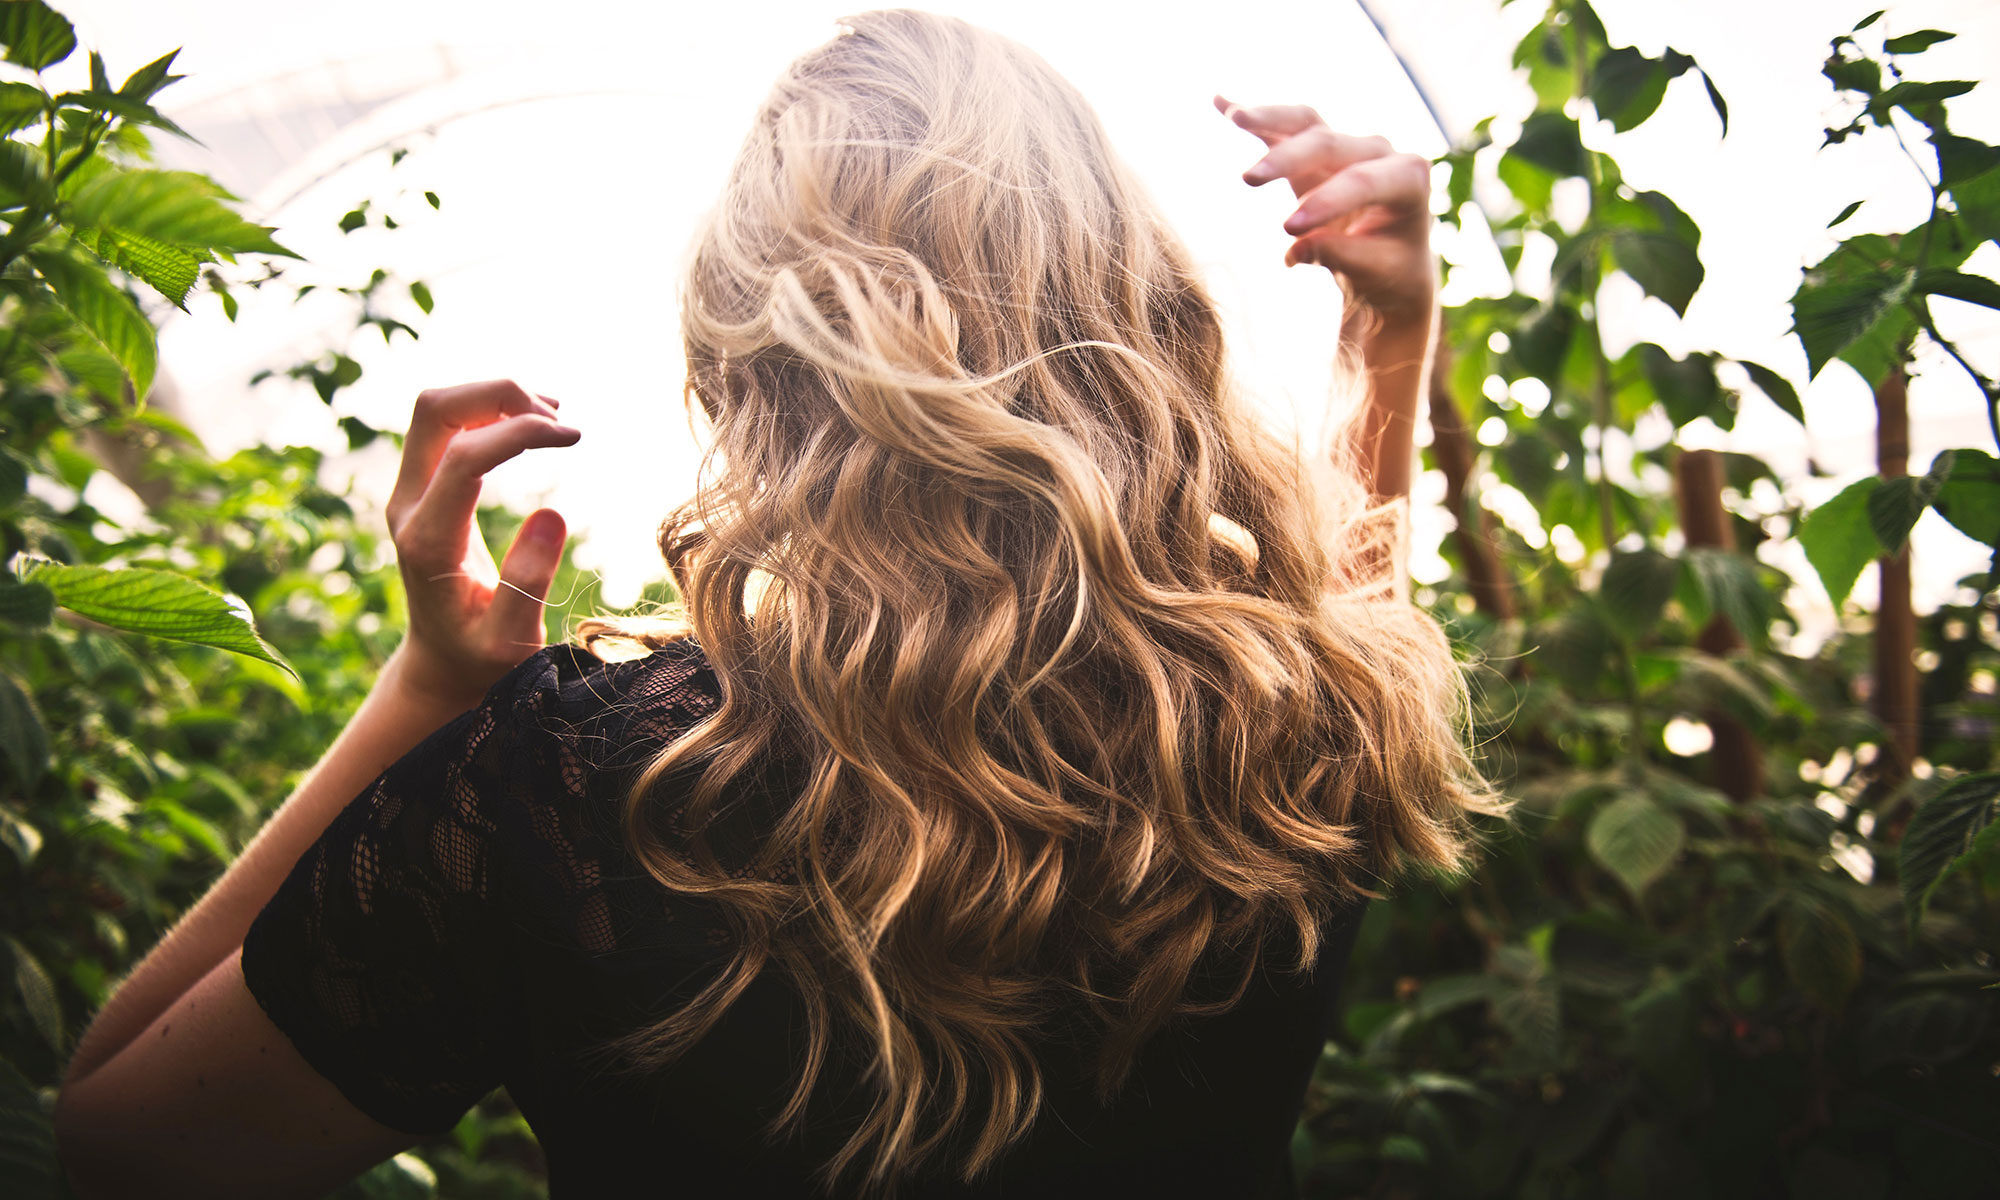 Woman Outside with Long, Wavy, Blond Hair